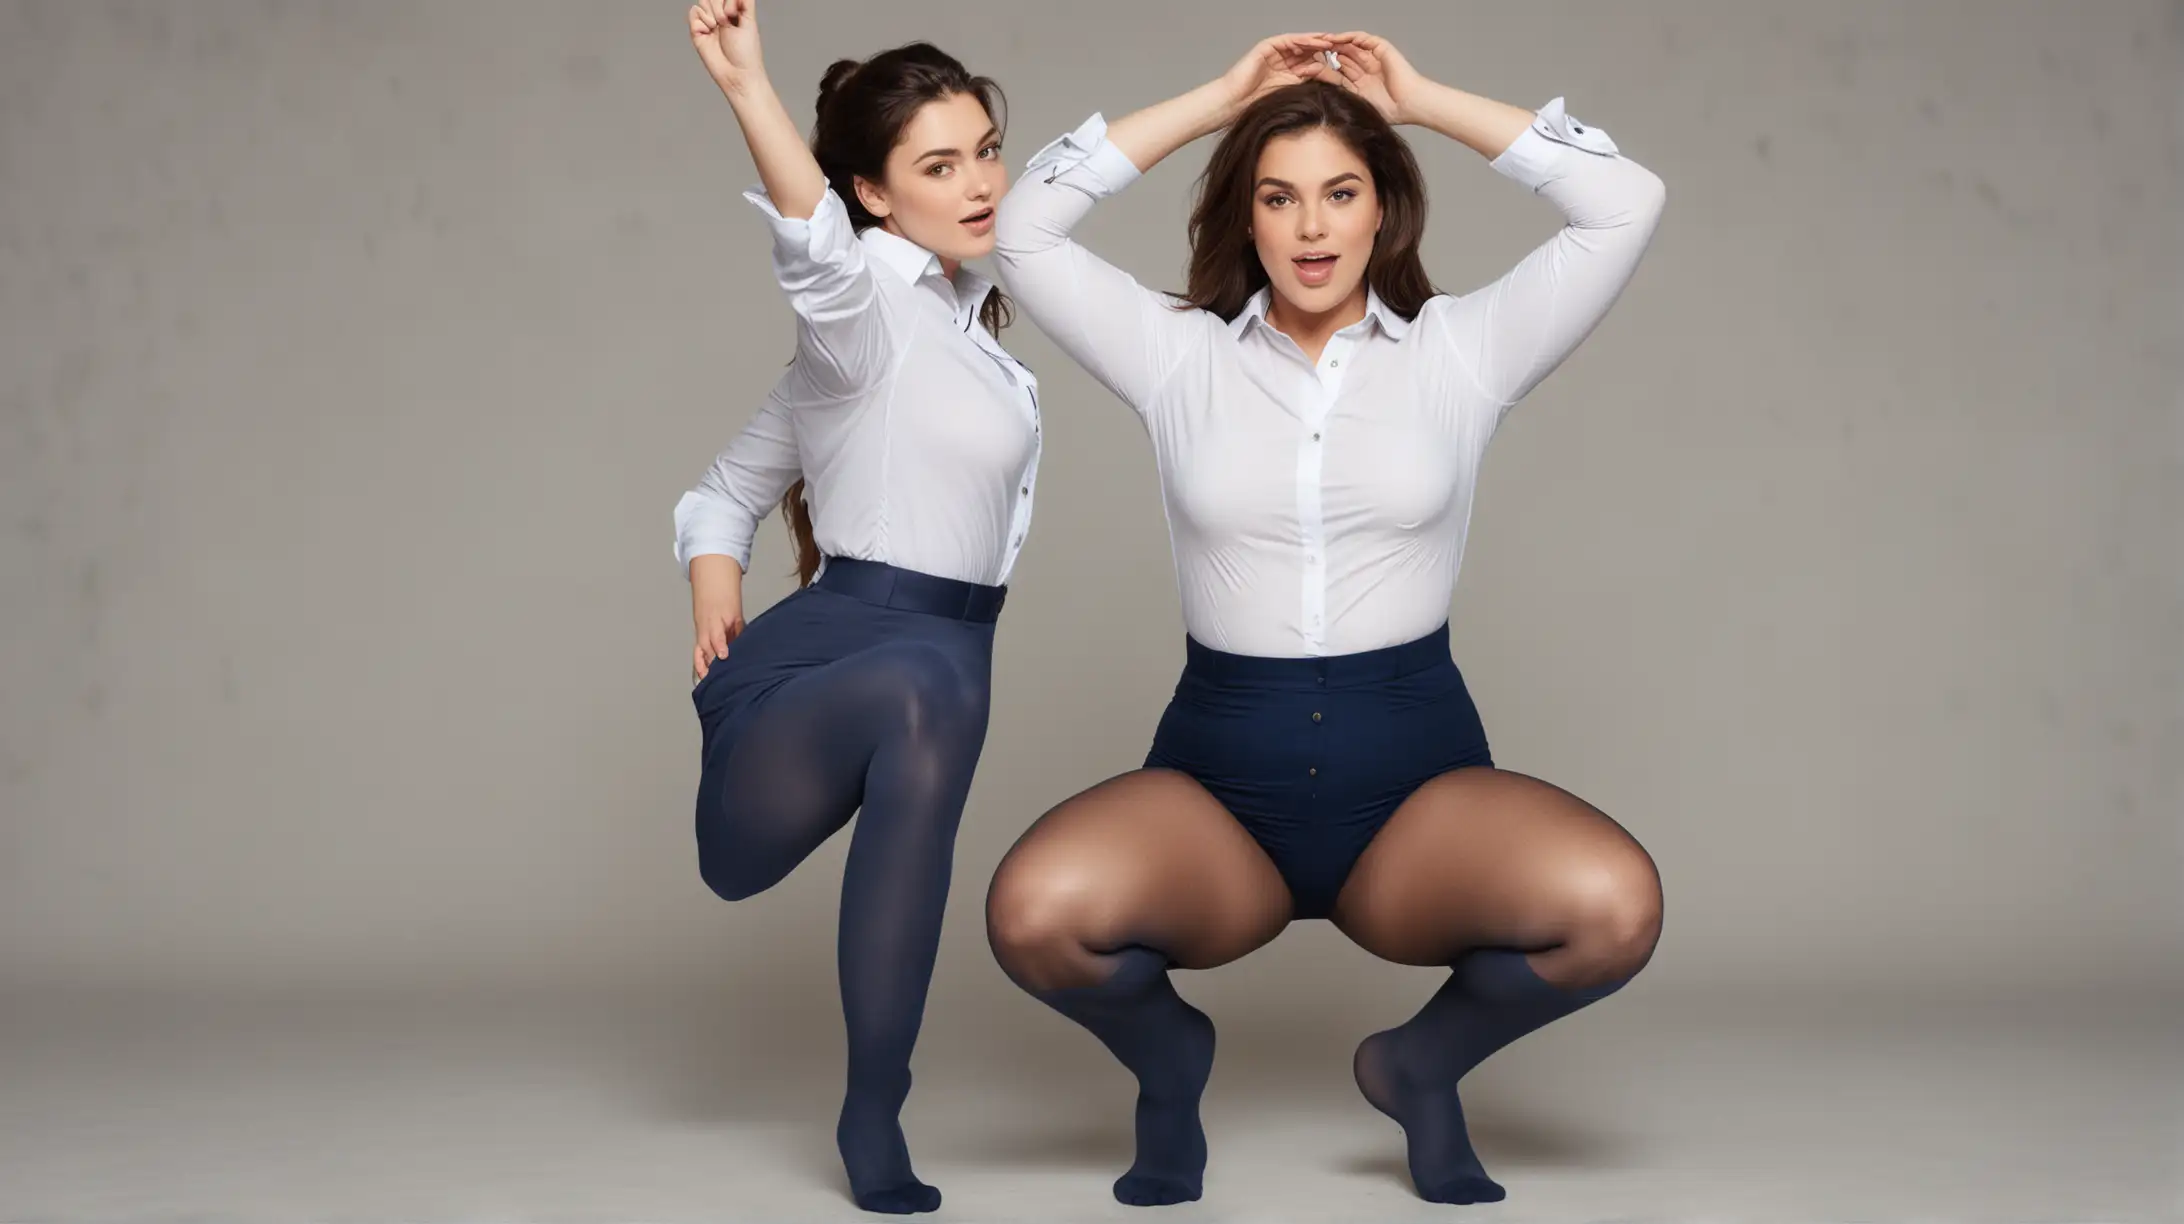 Beautiful, Curvy, Woman with Dark Hair, arms raised high, wearing an untucked white button down shirt, Gray Pantyhose, Squat position with a Curvy, Lighter Haired Woman, wearing an untucked blue button down shirt, Navy Blue Pantyhose, also squatting.